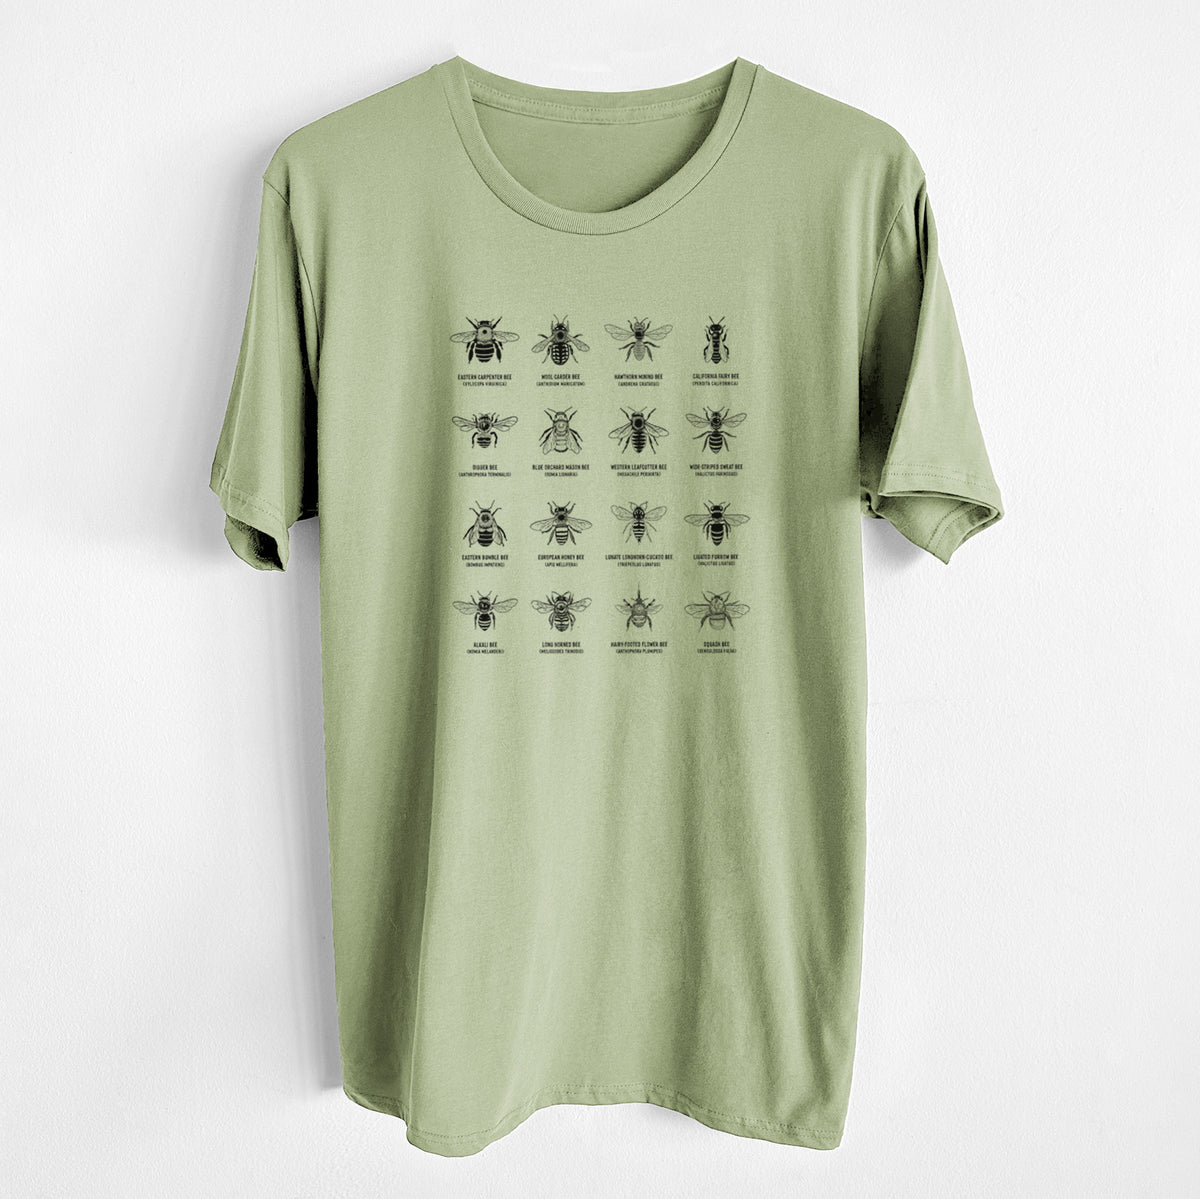 Bee Chart - Bees in North America - Unisex Crewneck - Made in USA - 100% Organic Cotton